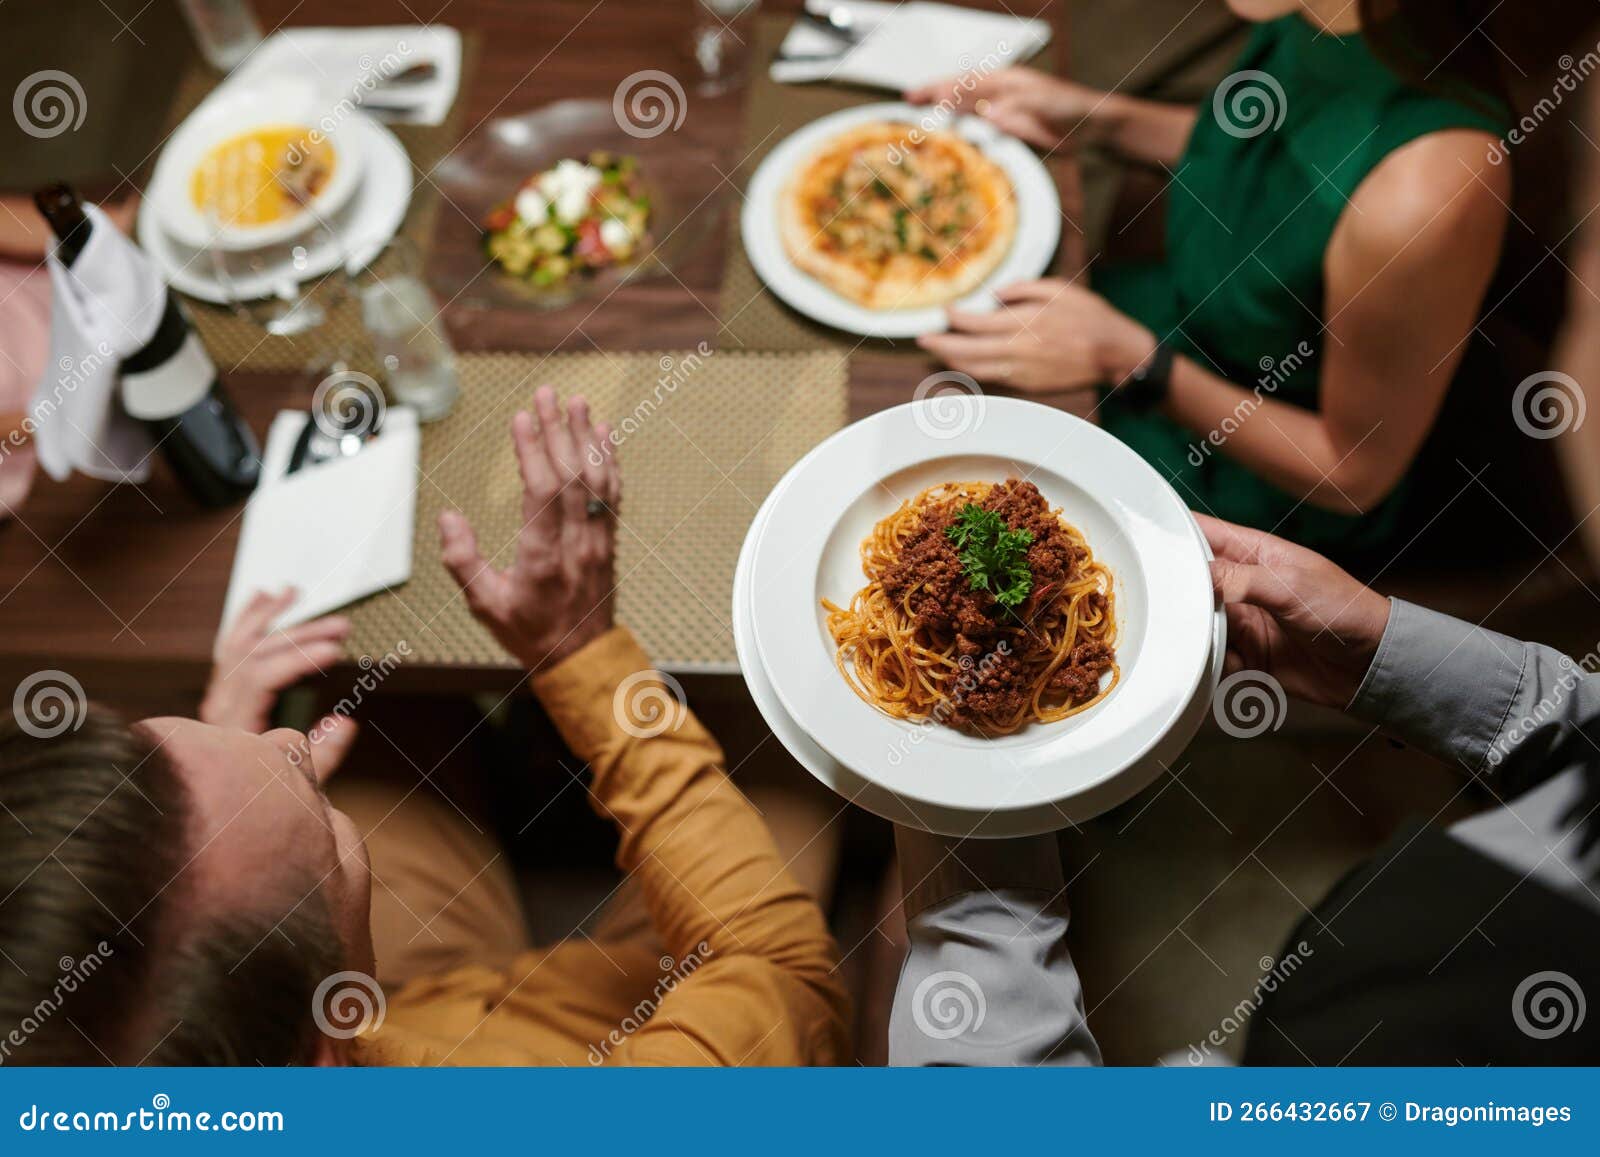 Waiter Serving Spaghetti Bolognese Stock Image - Image of guest, table ...